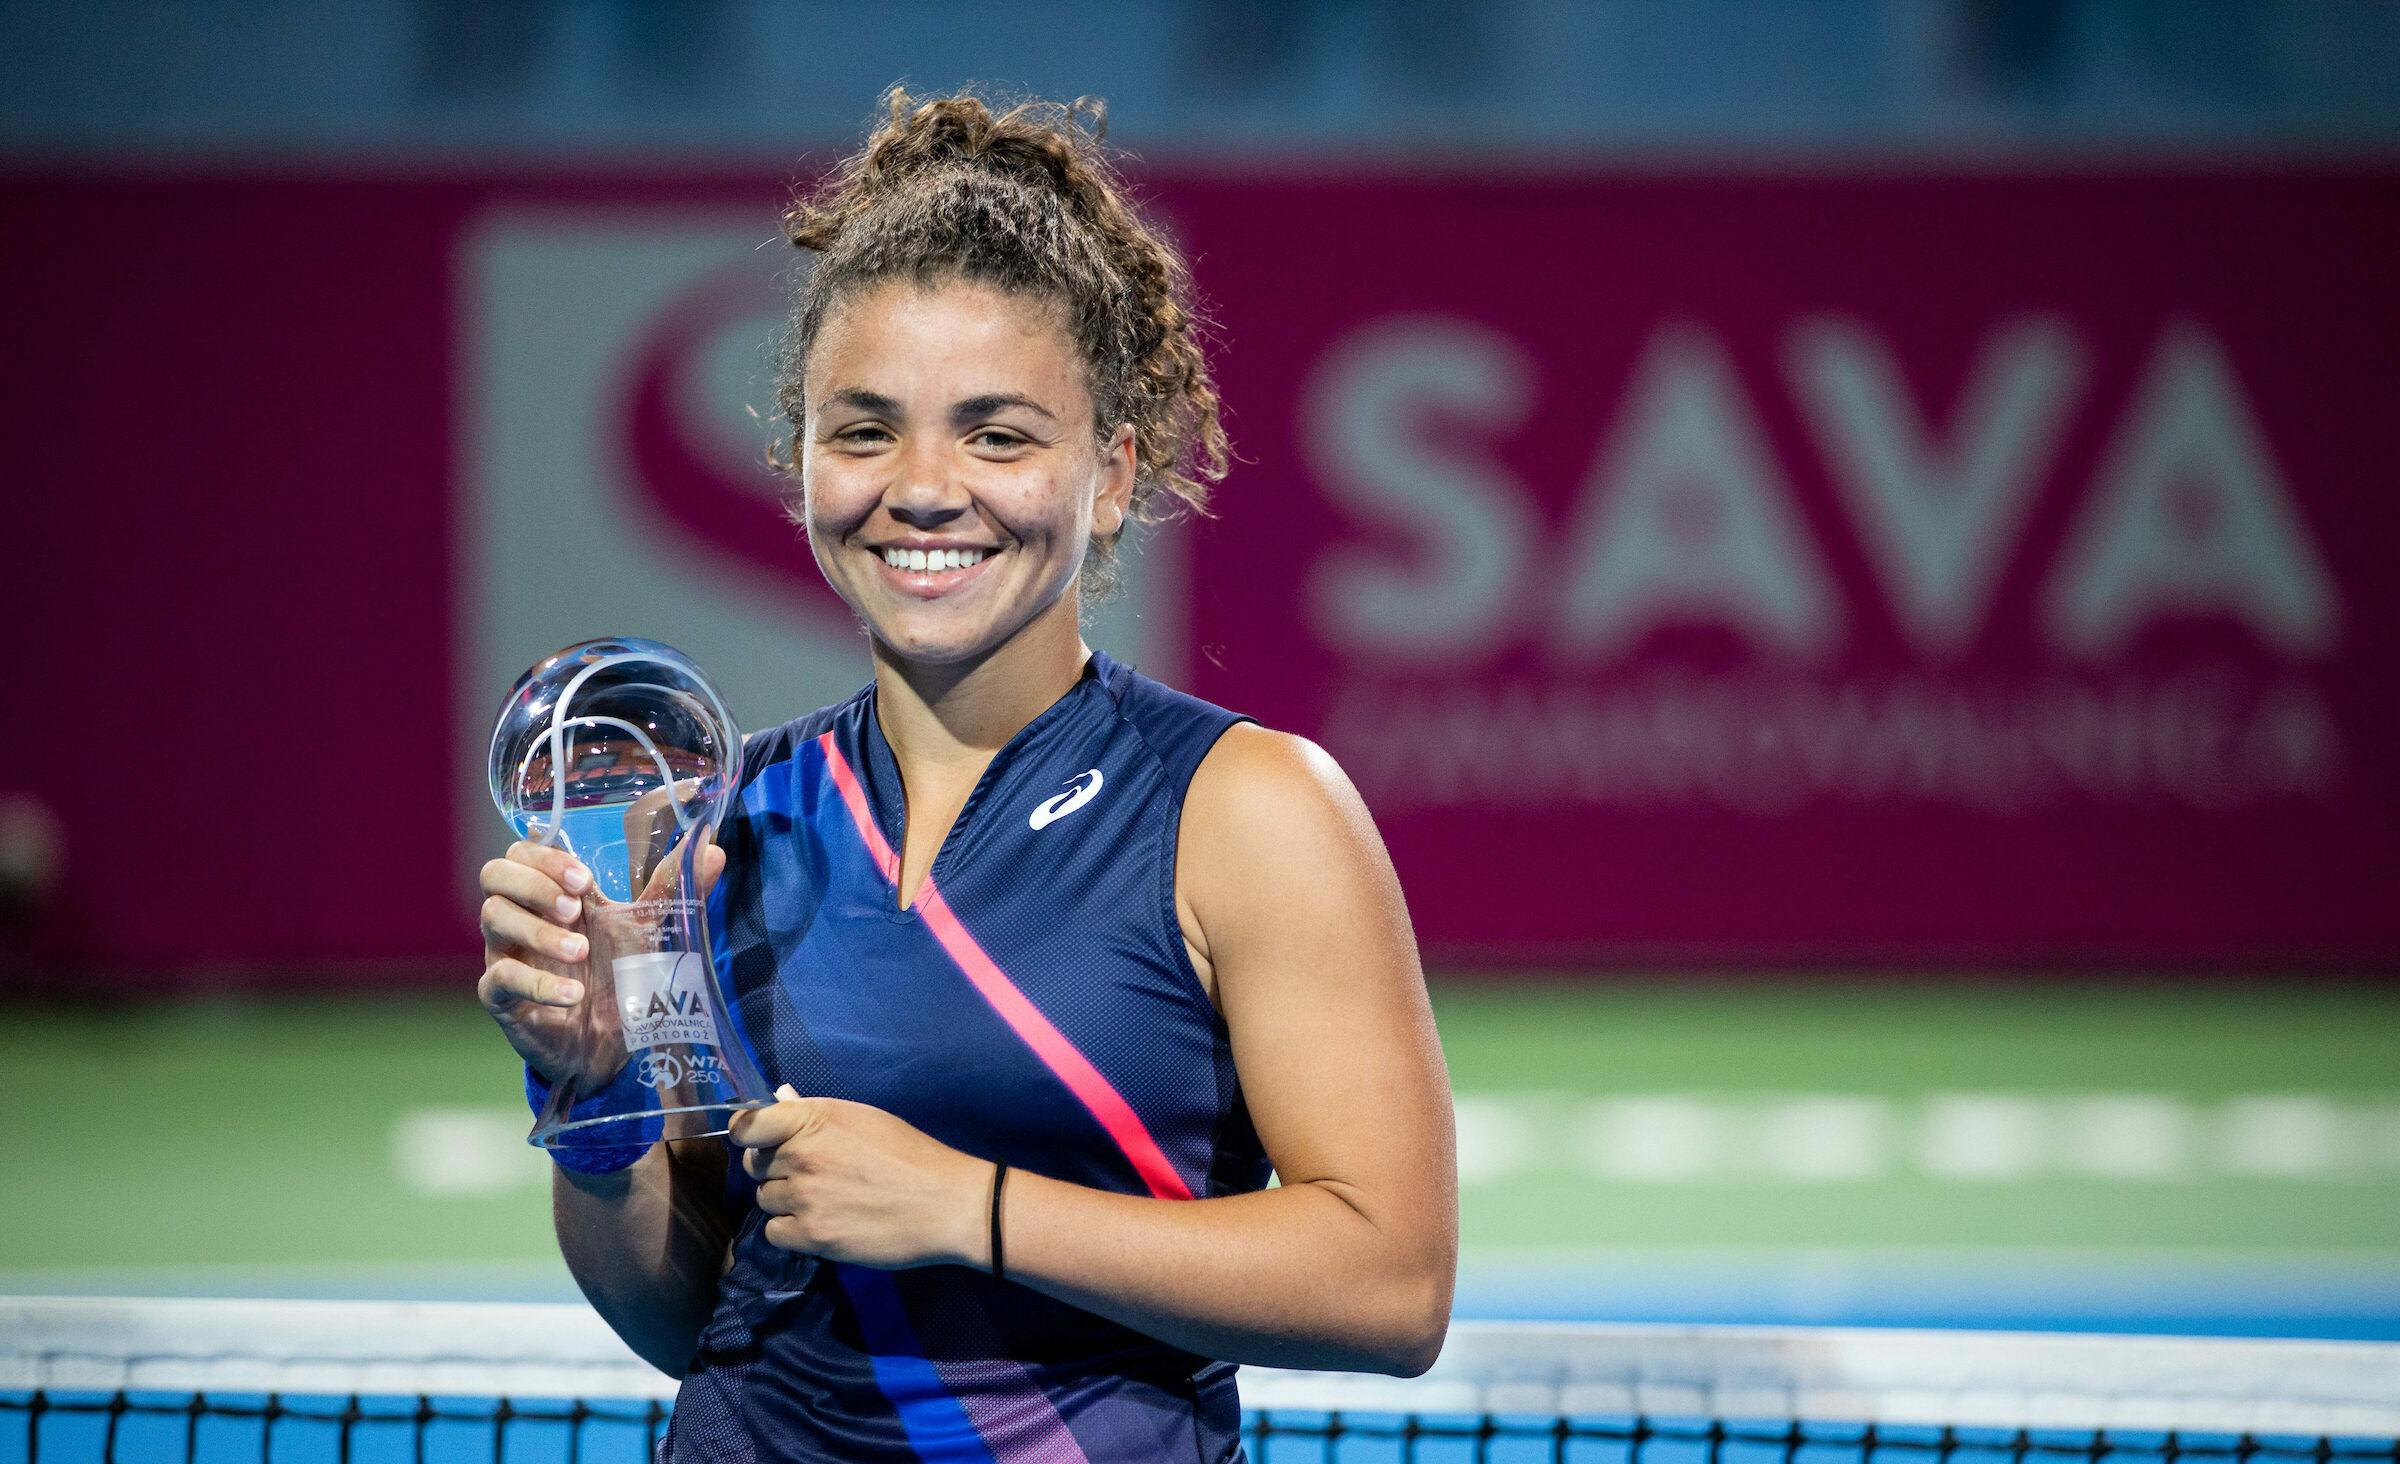 US Open Iga Swiatek: All you want to know about Iga Swiatek vs Jasmine Paolini 1st ROUND match, HEAD to HEAD, Odds & Predictions & LIVE Streaming details: Follow US OPEN 2022 LIVE